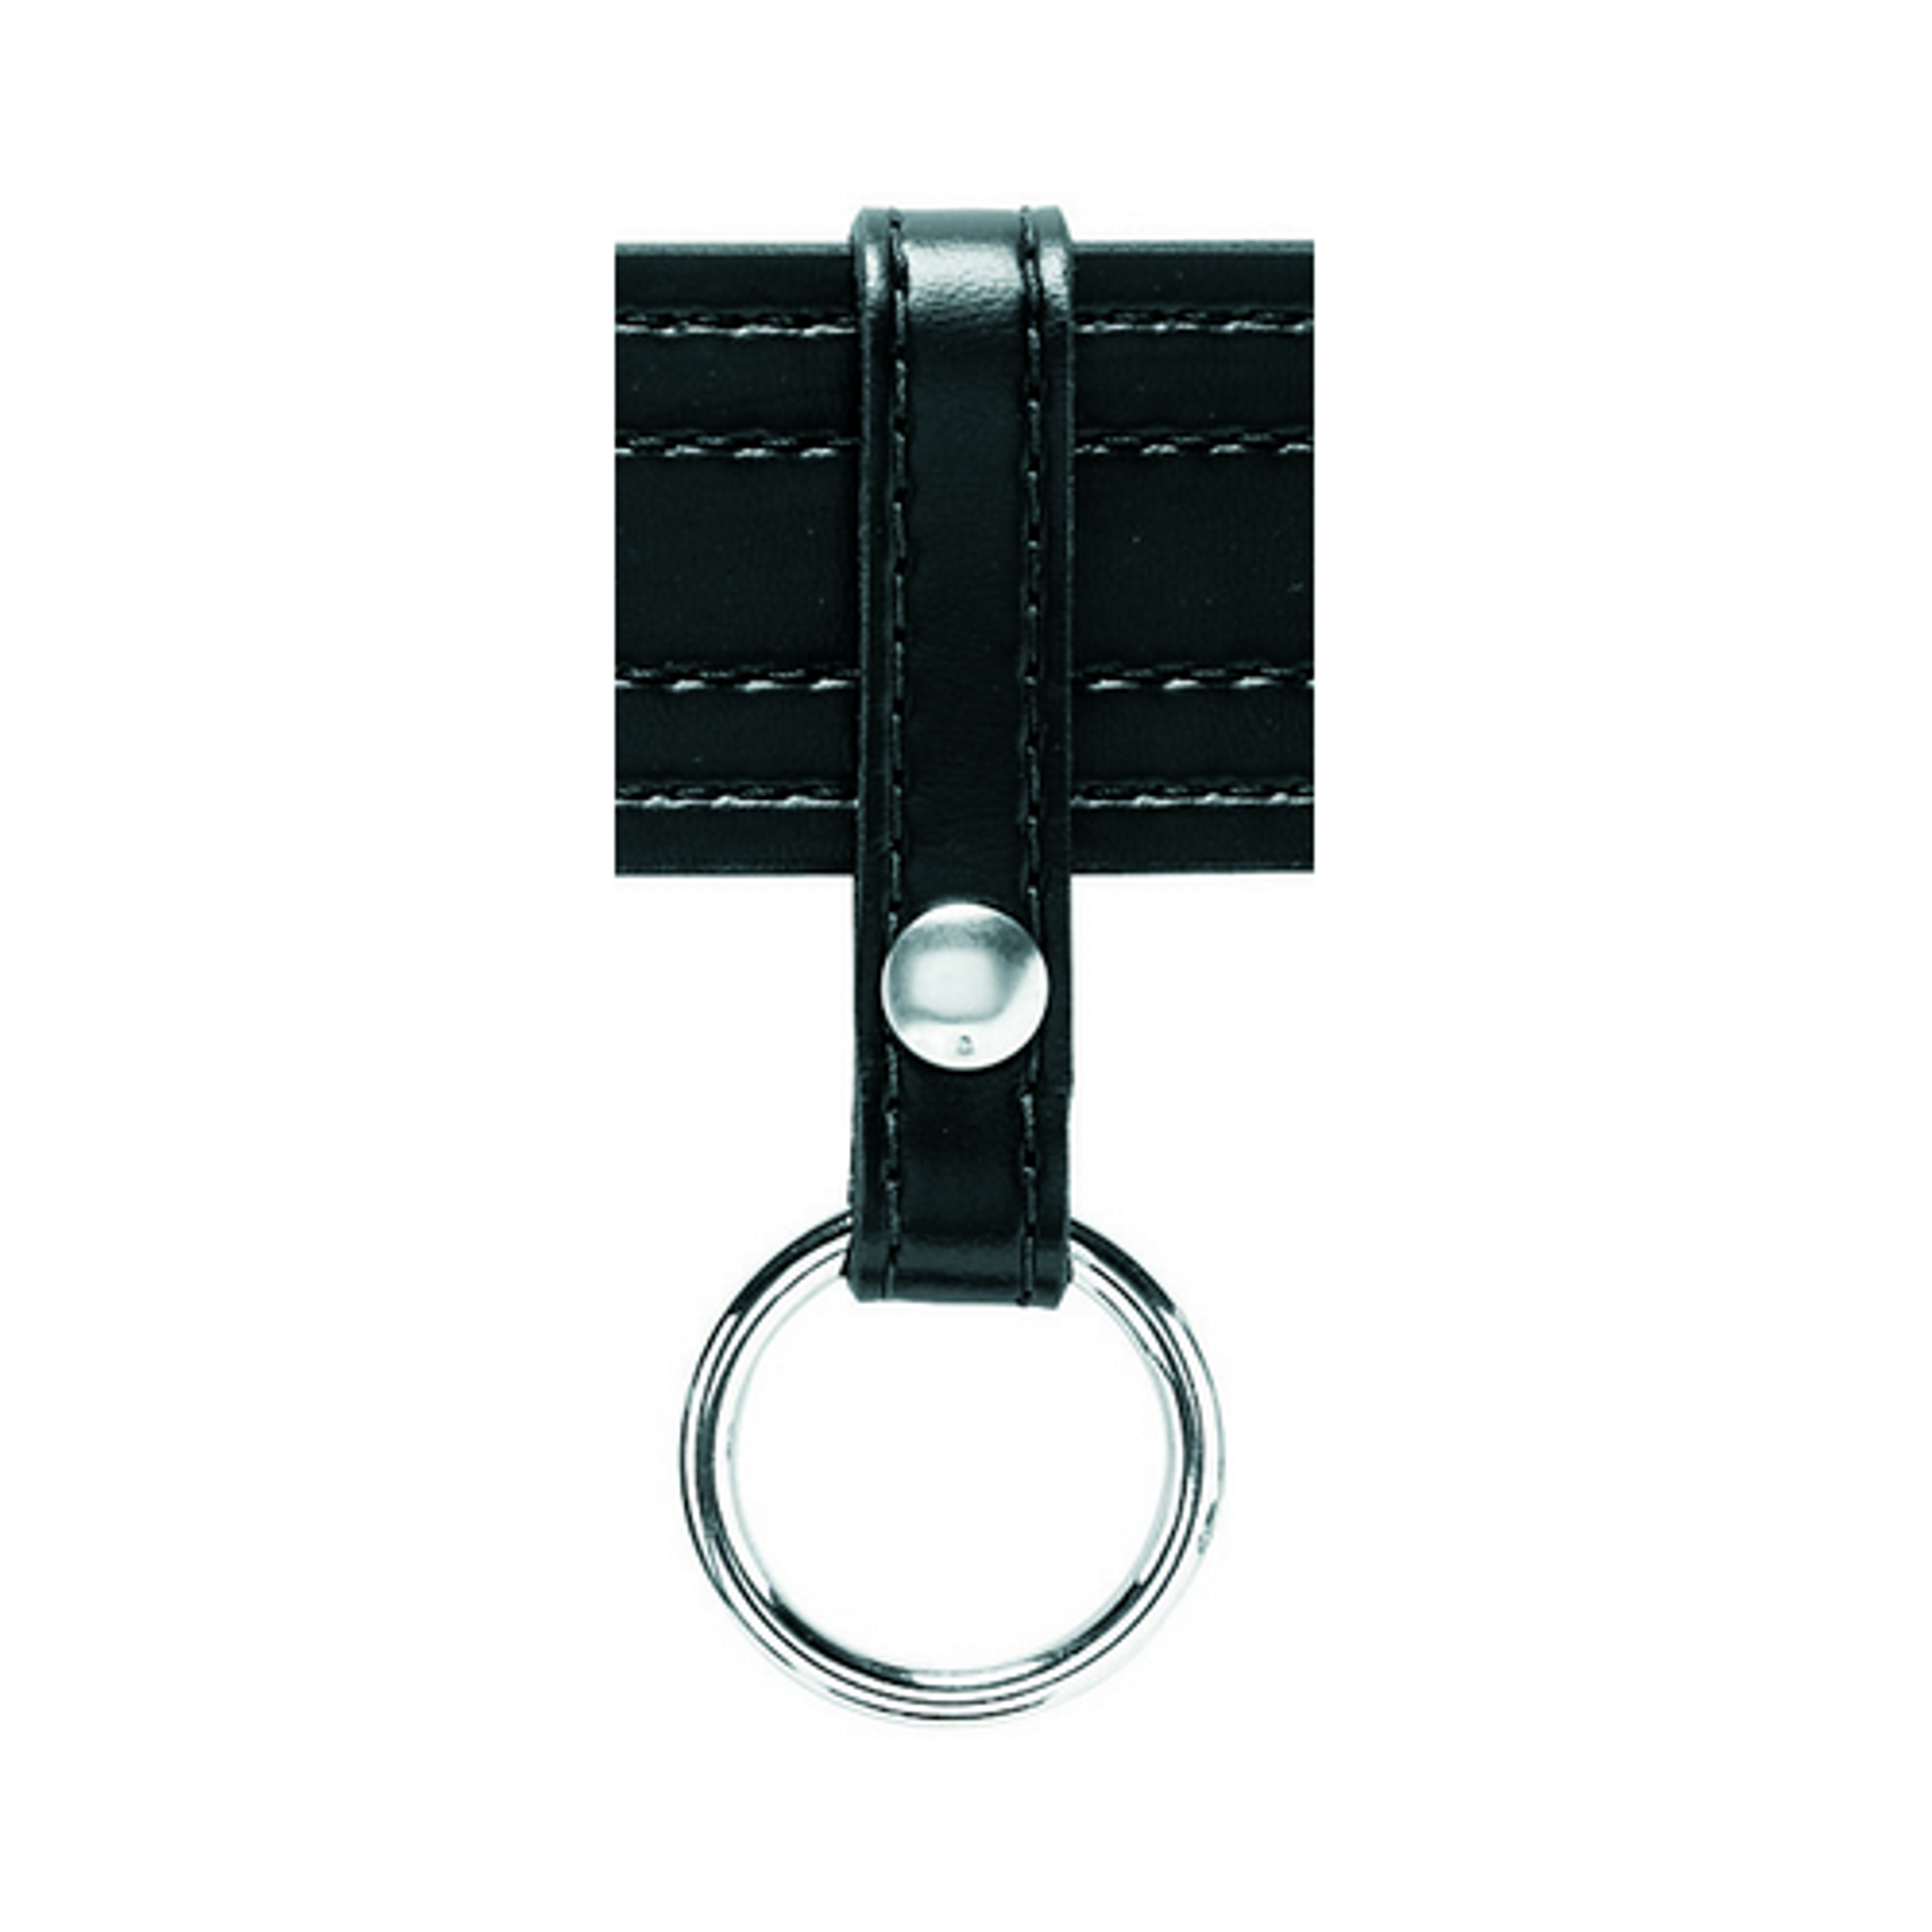 Model 67s Baton Ring With Snap - KR67S-4B